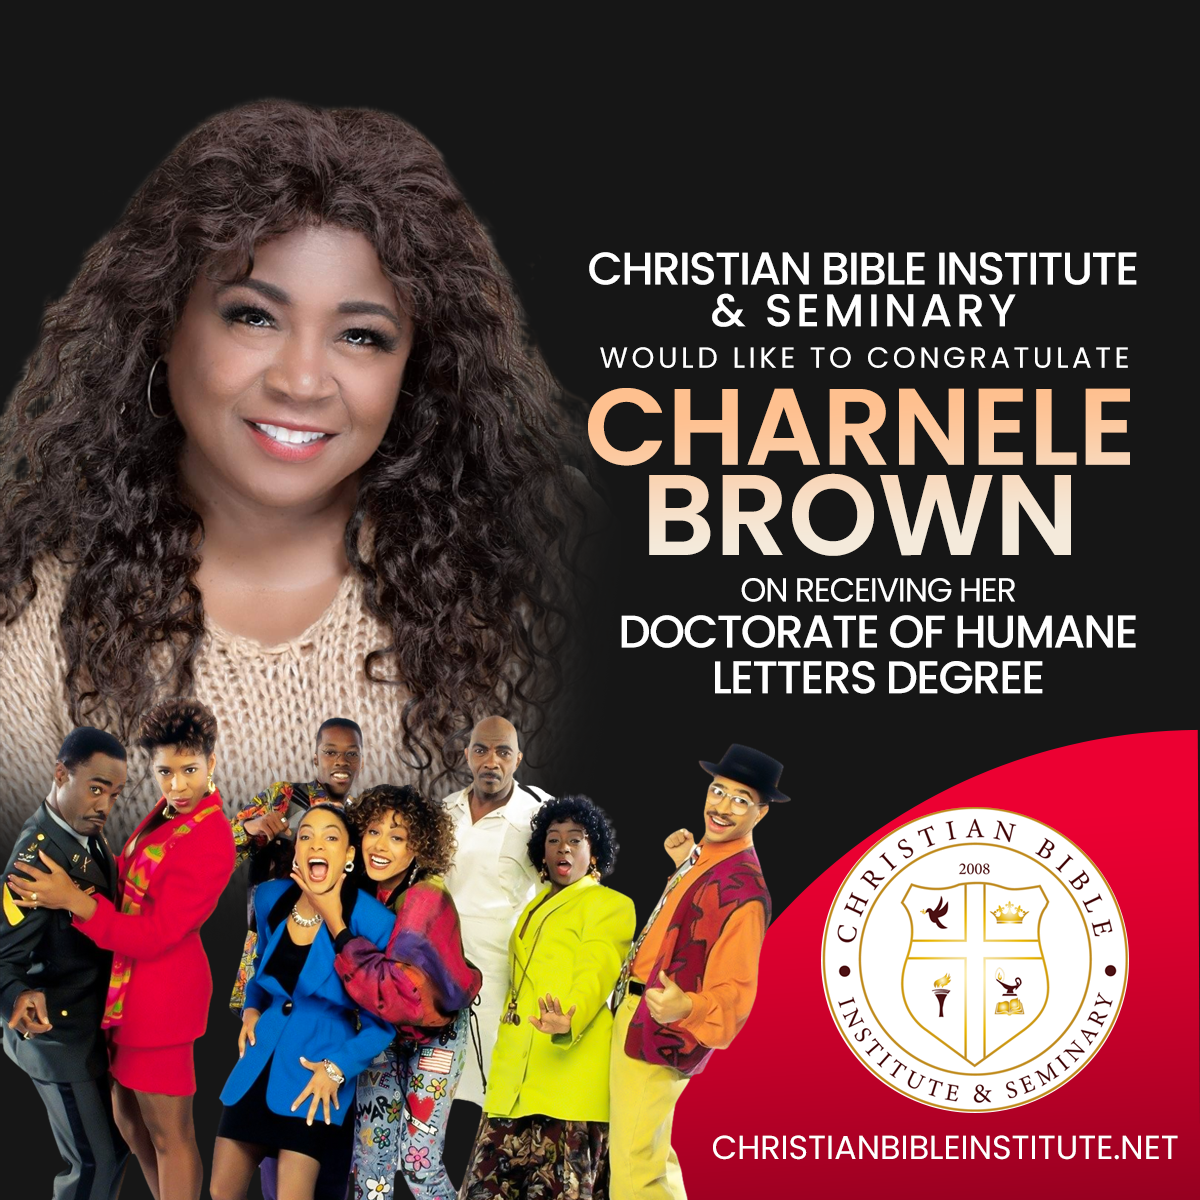 CBIS Charnele Brown Doctorate of Humane Letters Degree